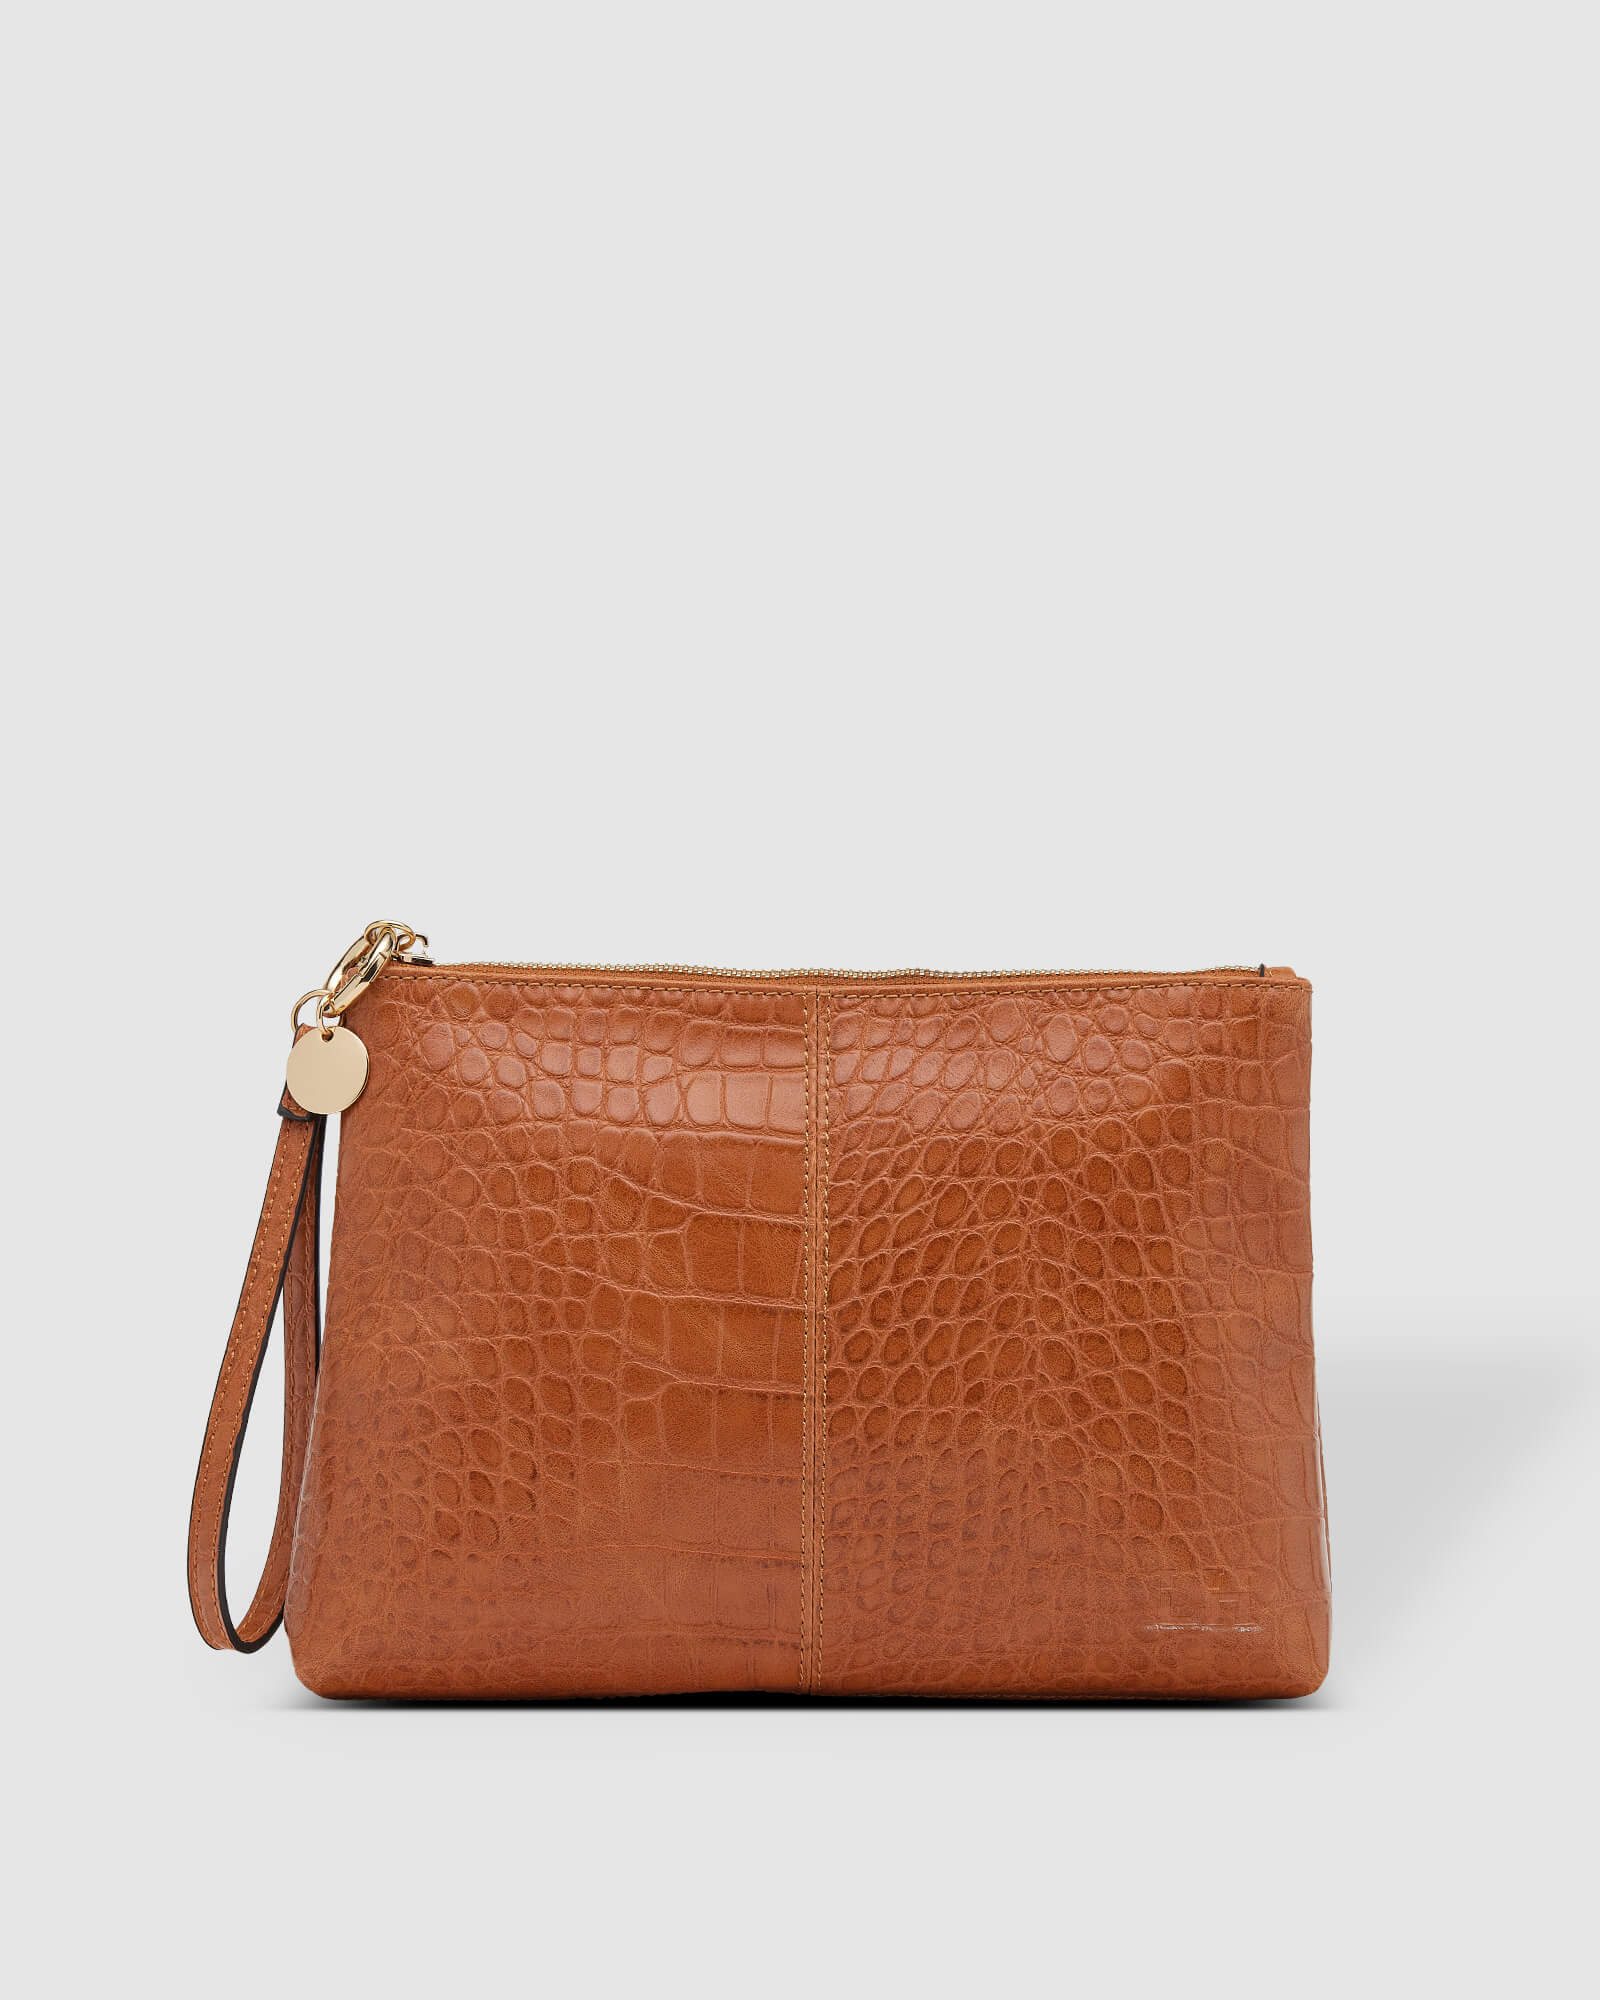 Straat Afdaling Seraph Gracie Croc Cognac Clutch – One Country Mouse